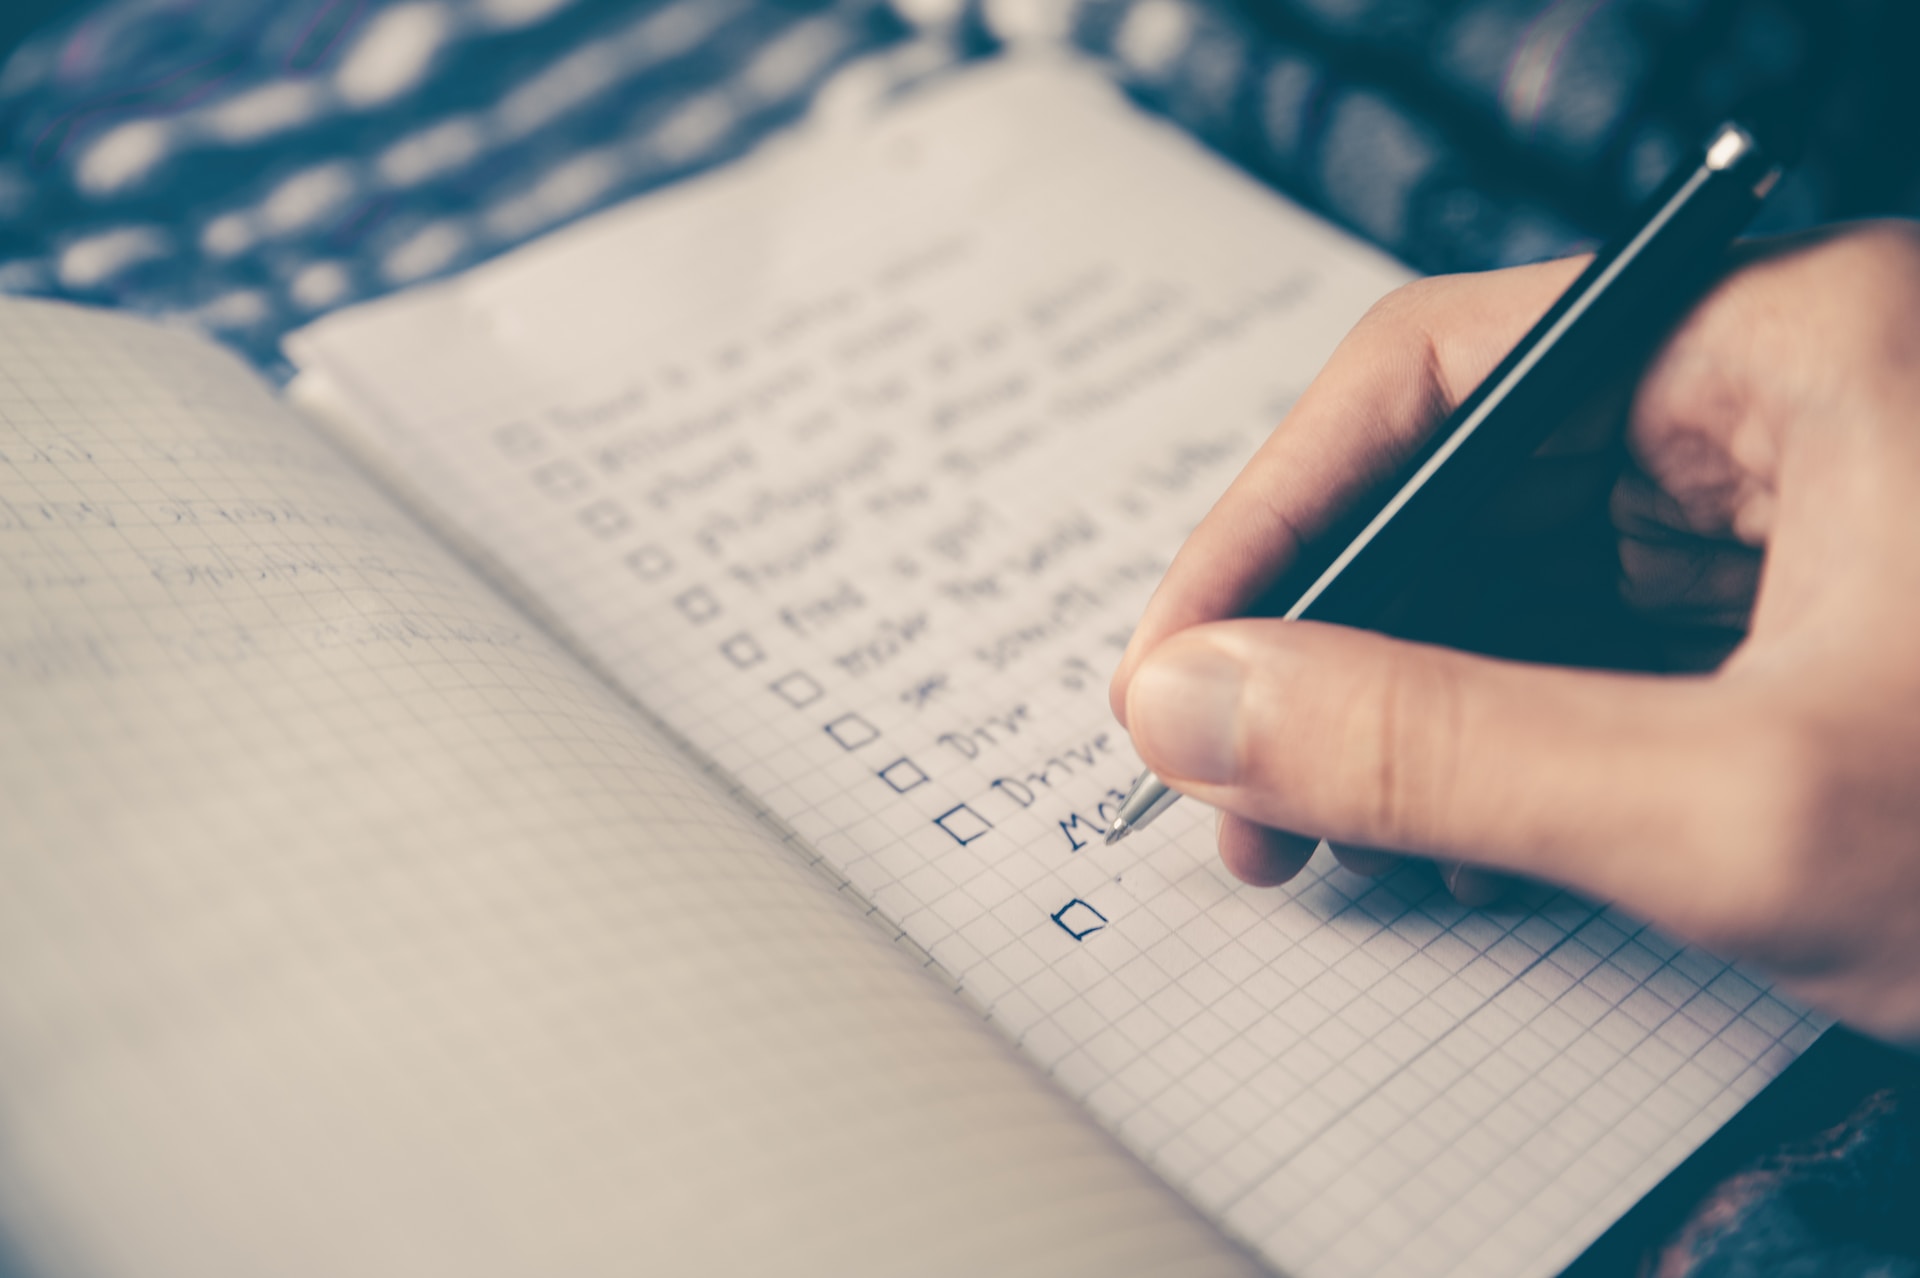 Someone writing a to-do list—there's something cathartic about handwriting a list and crossing items off, but digital productivity tools can help speed up and streamline tasks. 